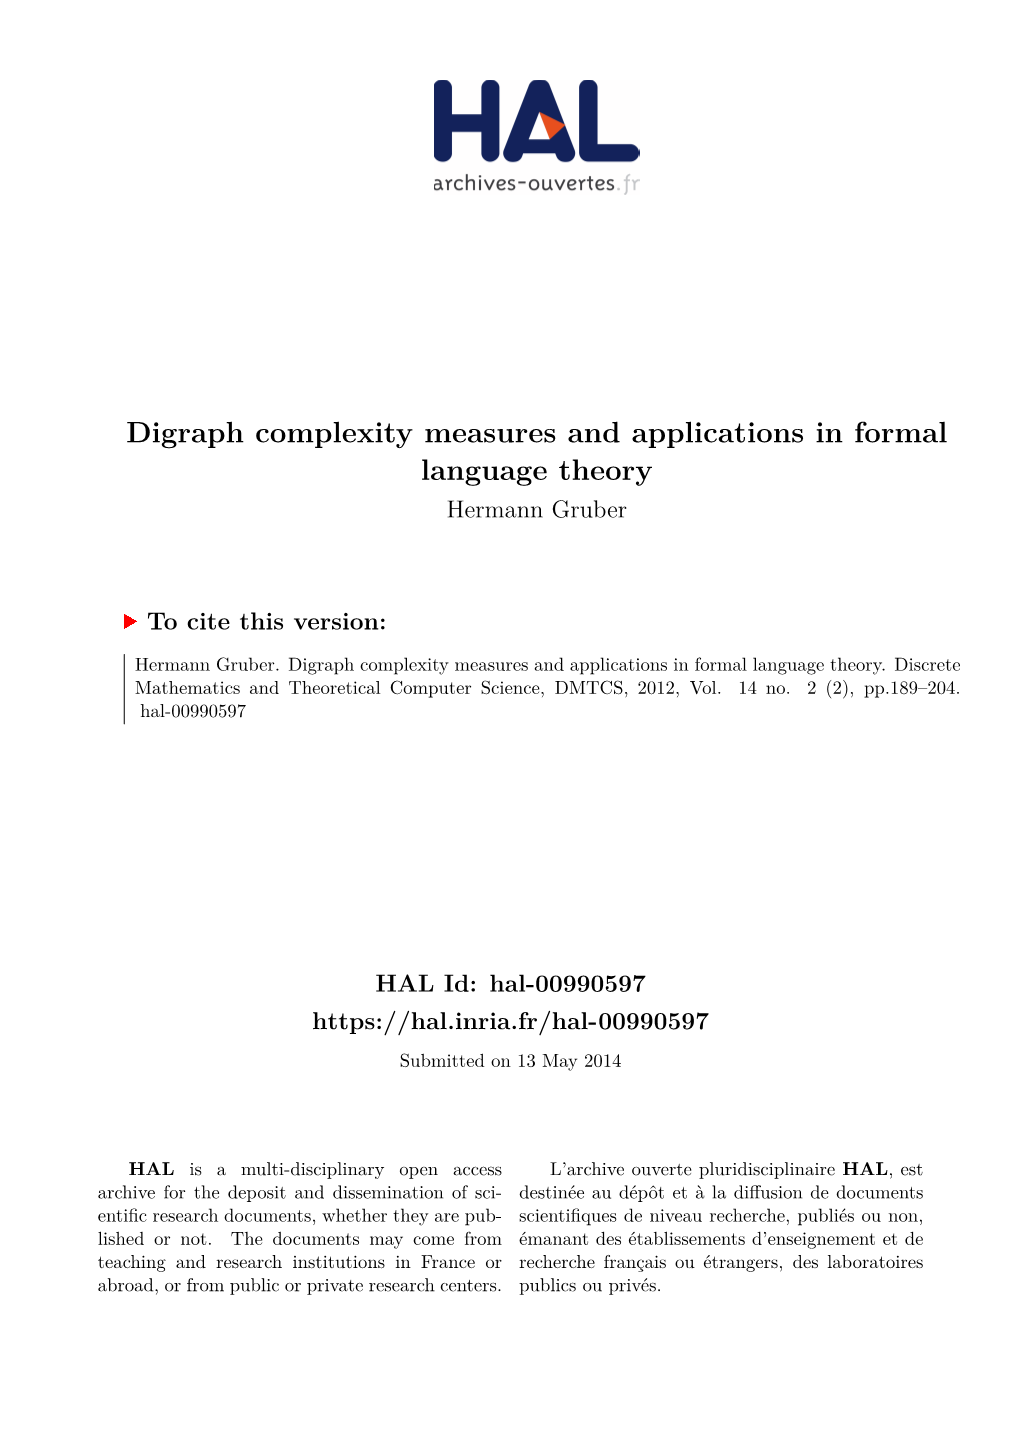 Digraph Complexity Measures and Applications in Formal Language Theory Hermann Gruber